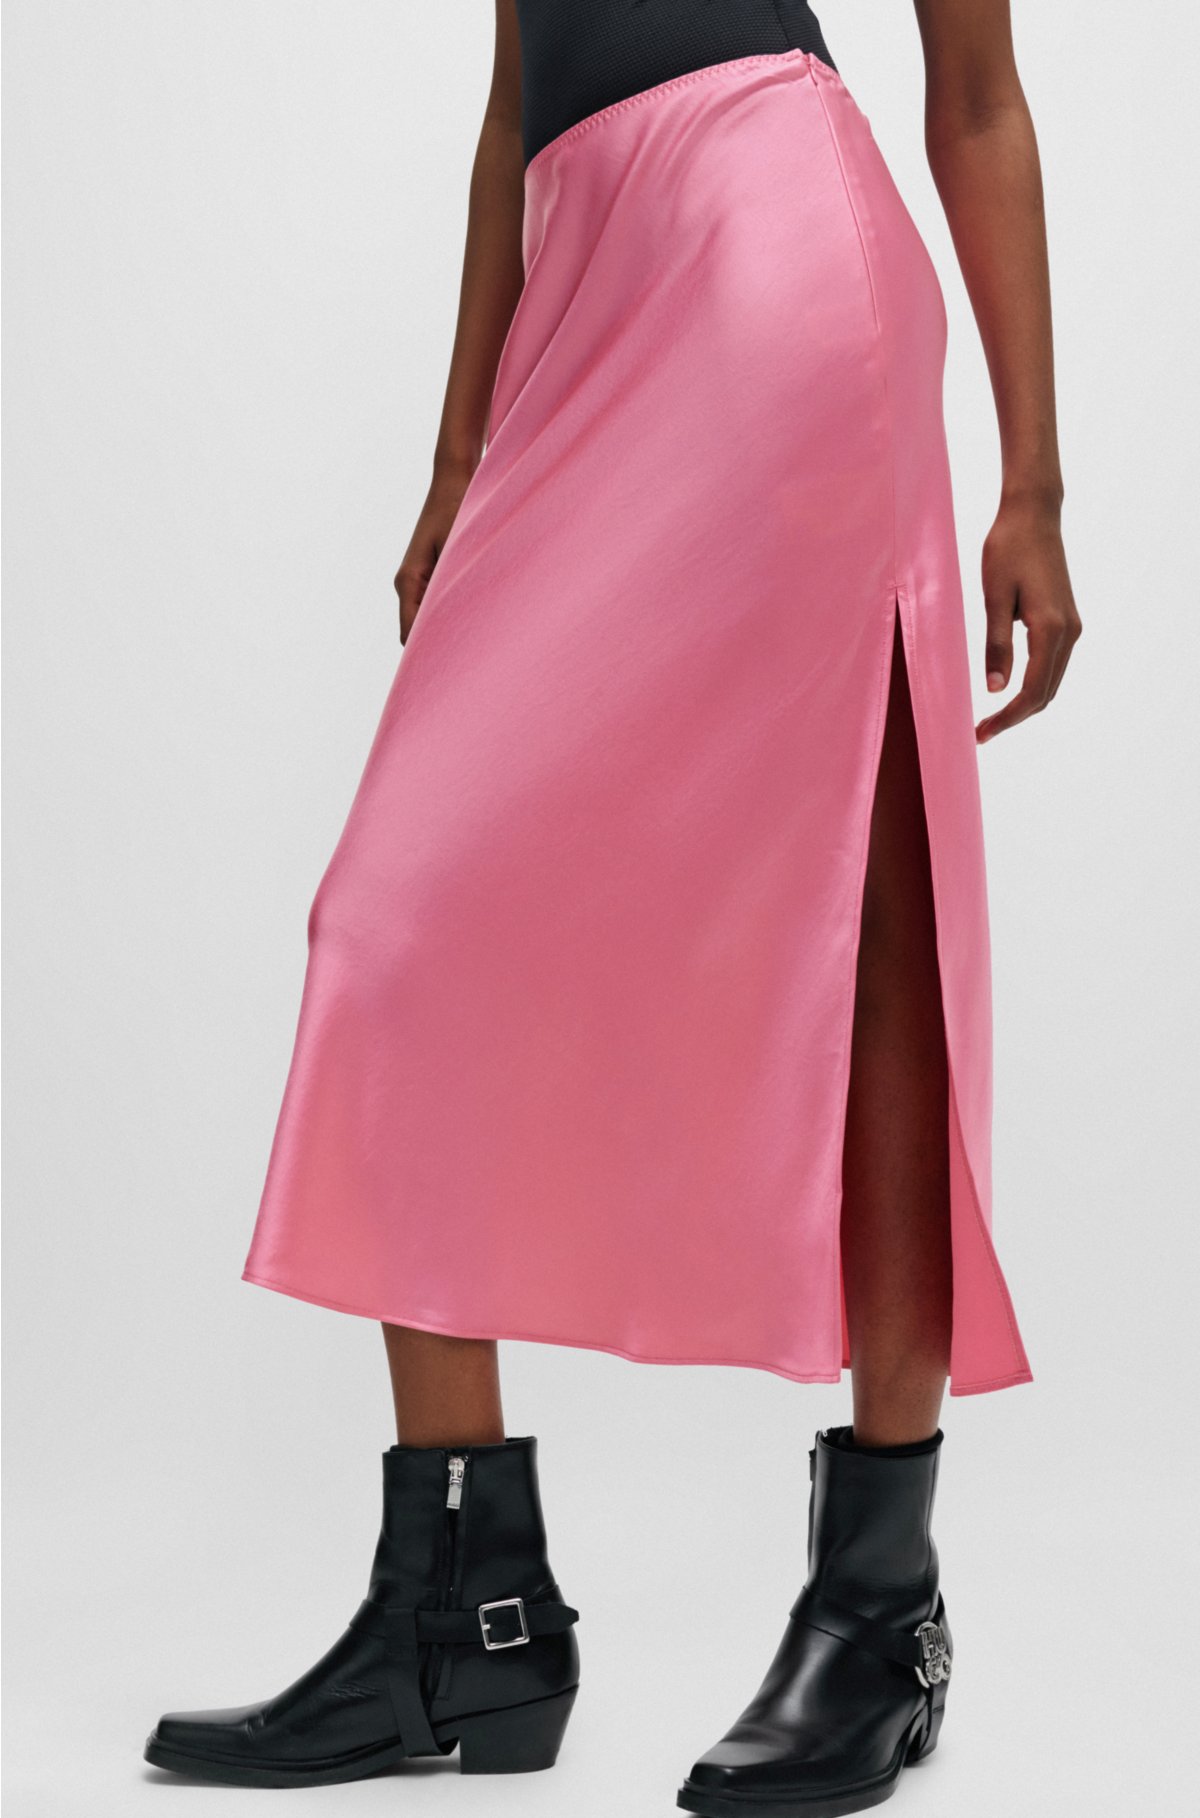 Maxi skirt in satin with side slit, light pink